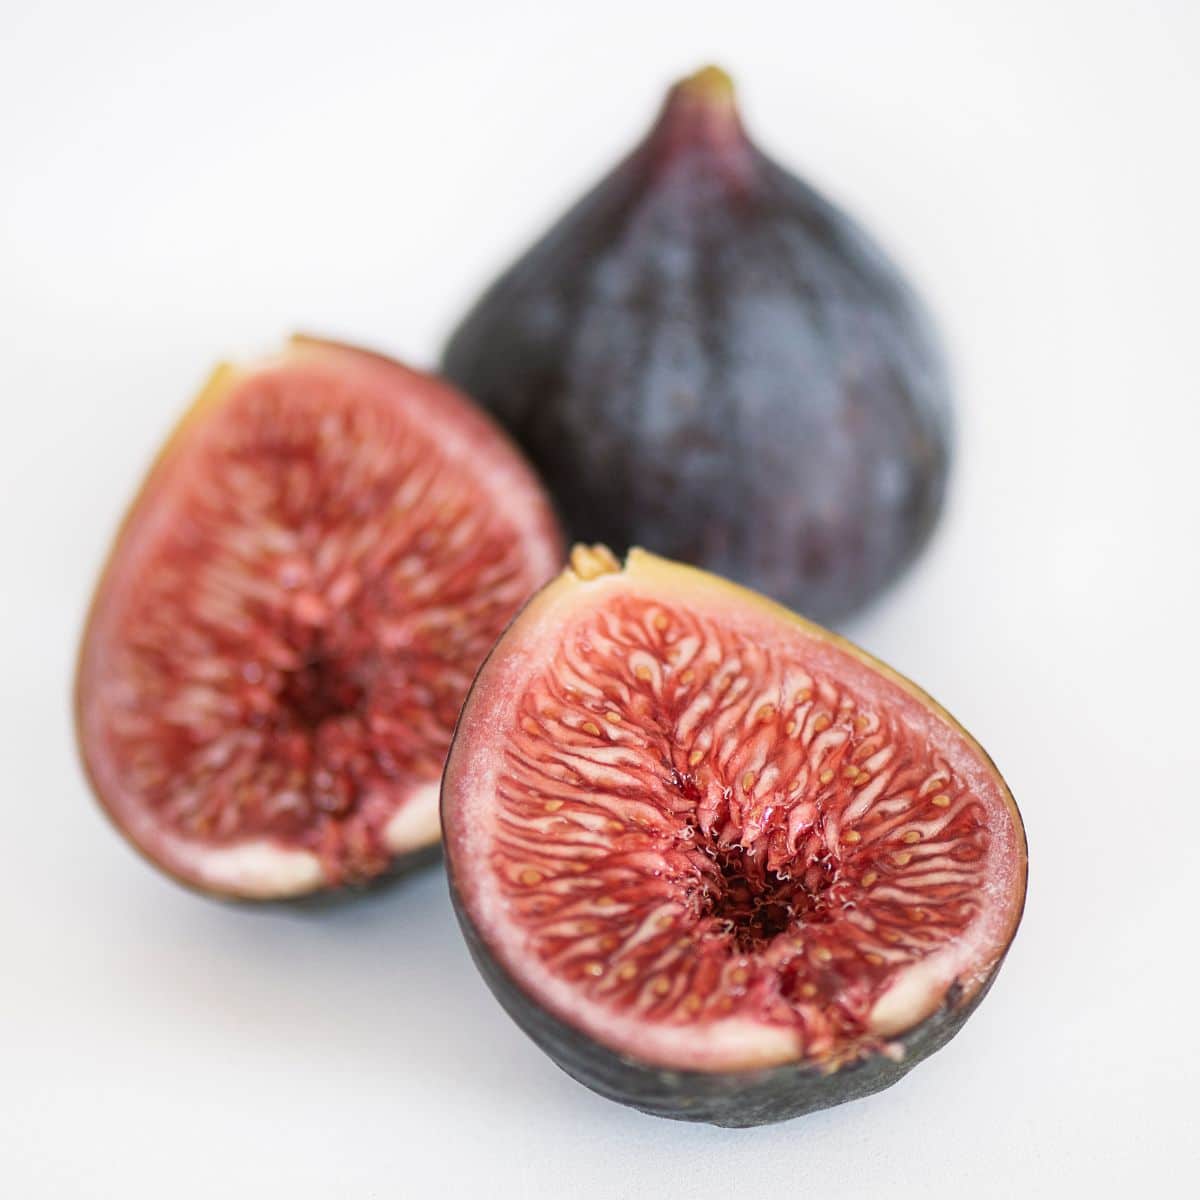 Black mission fig on an isolated white background.